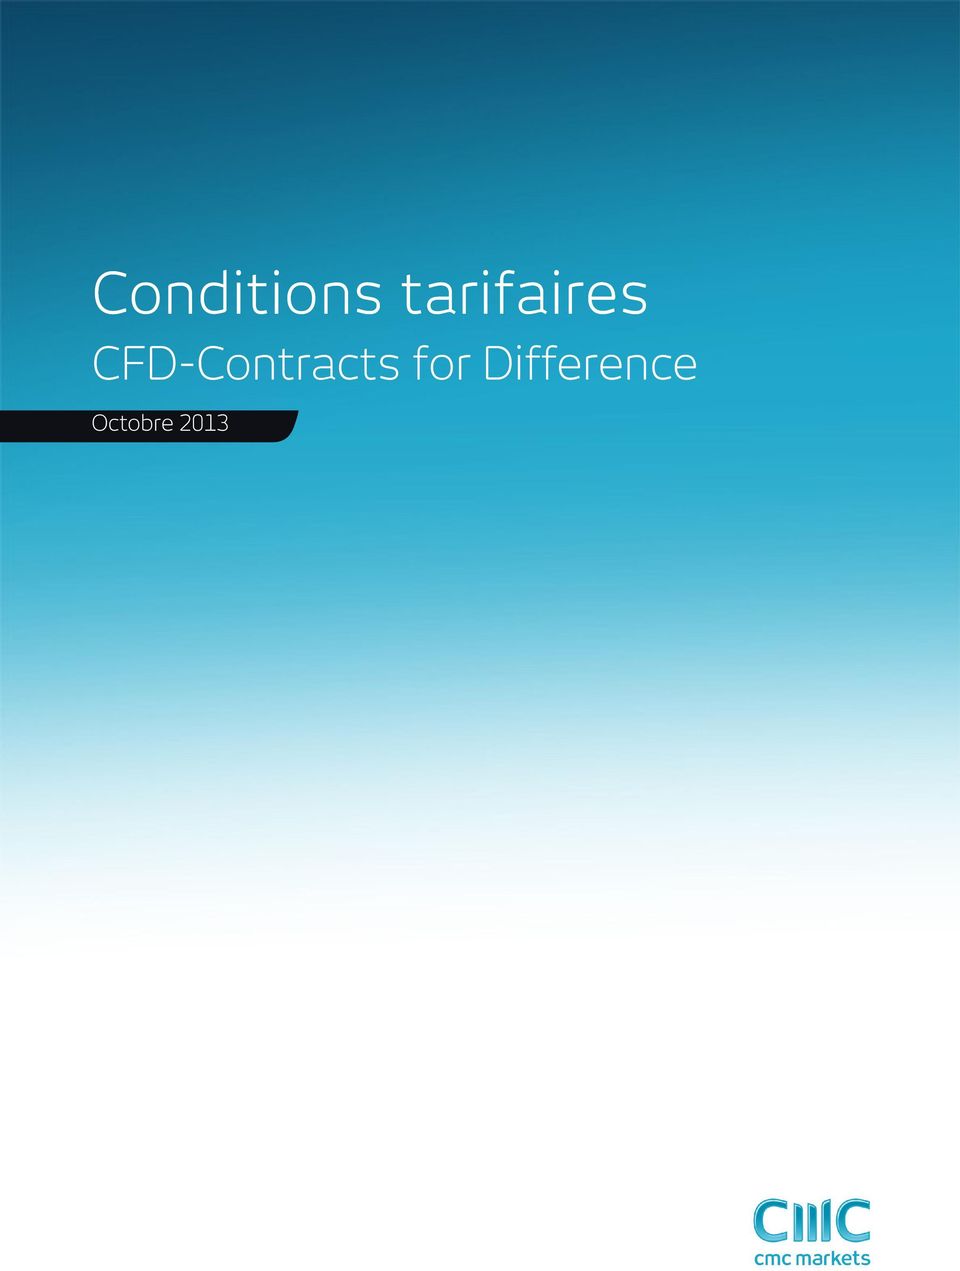 CFD-Contracts